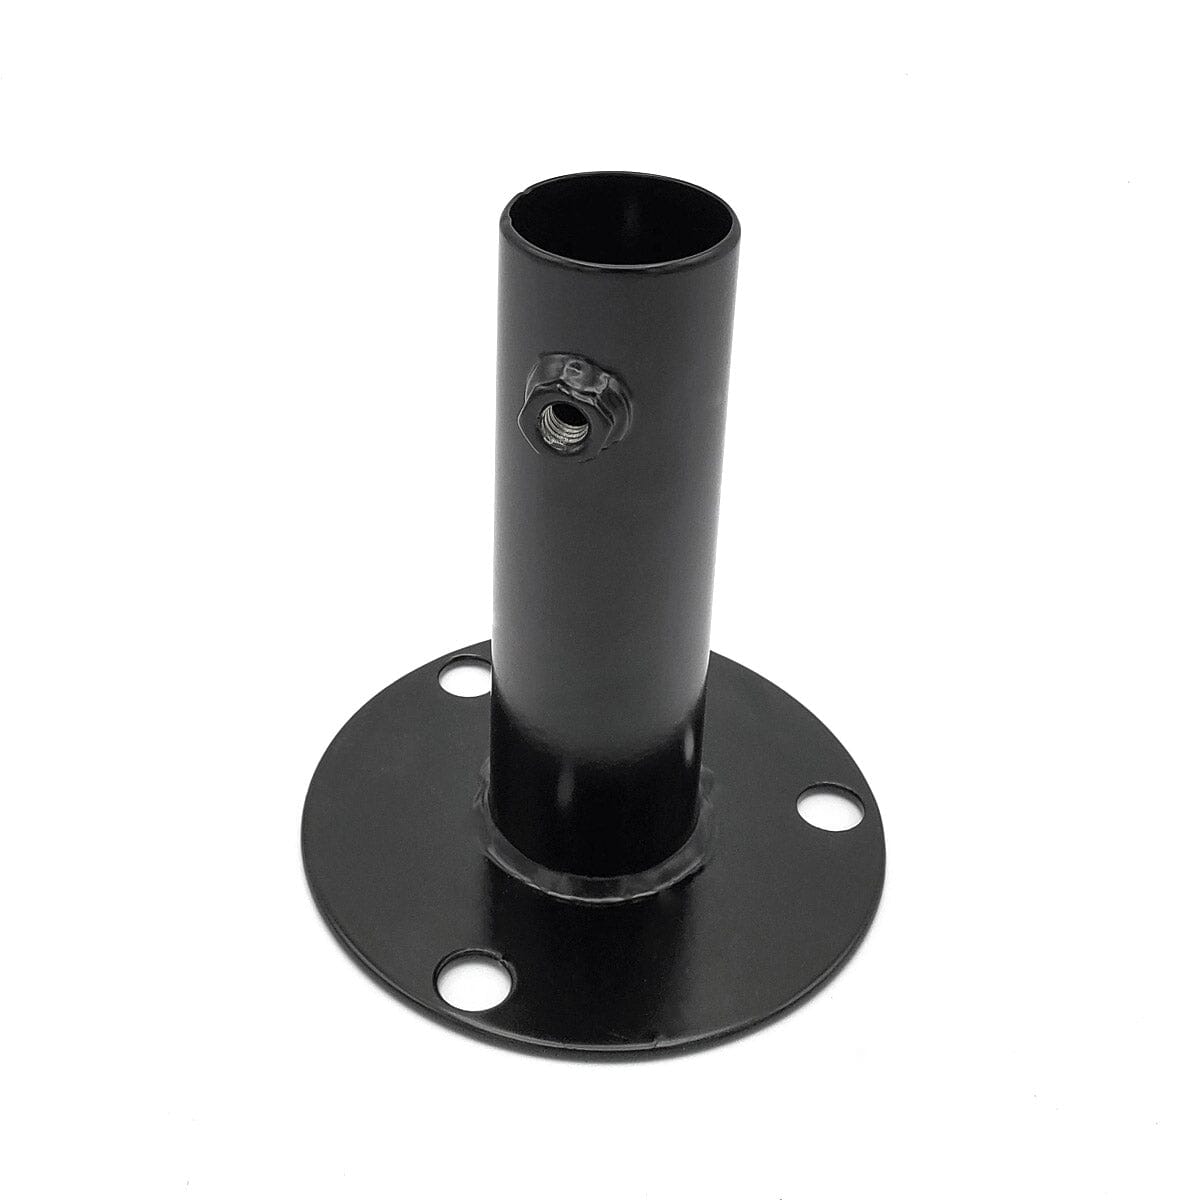 Foot pad attachment by Dog Proofer for stabilizing fence posts, 1 3/8-inch size.